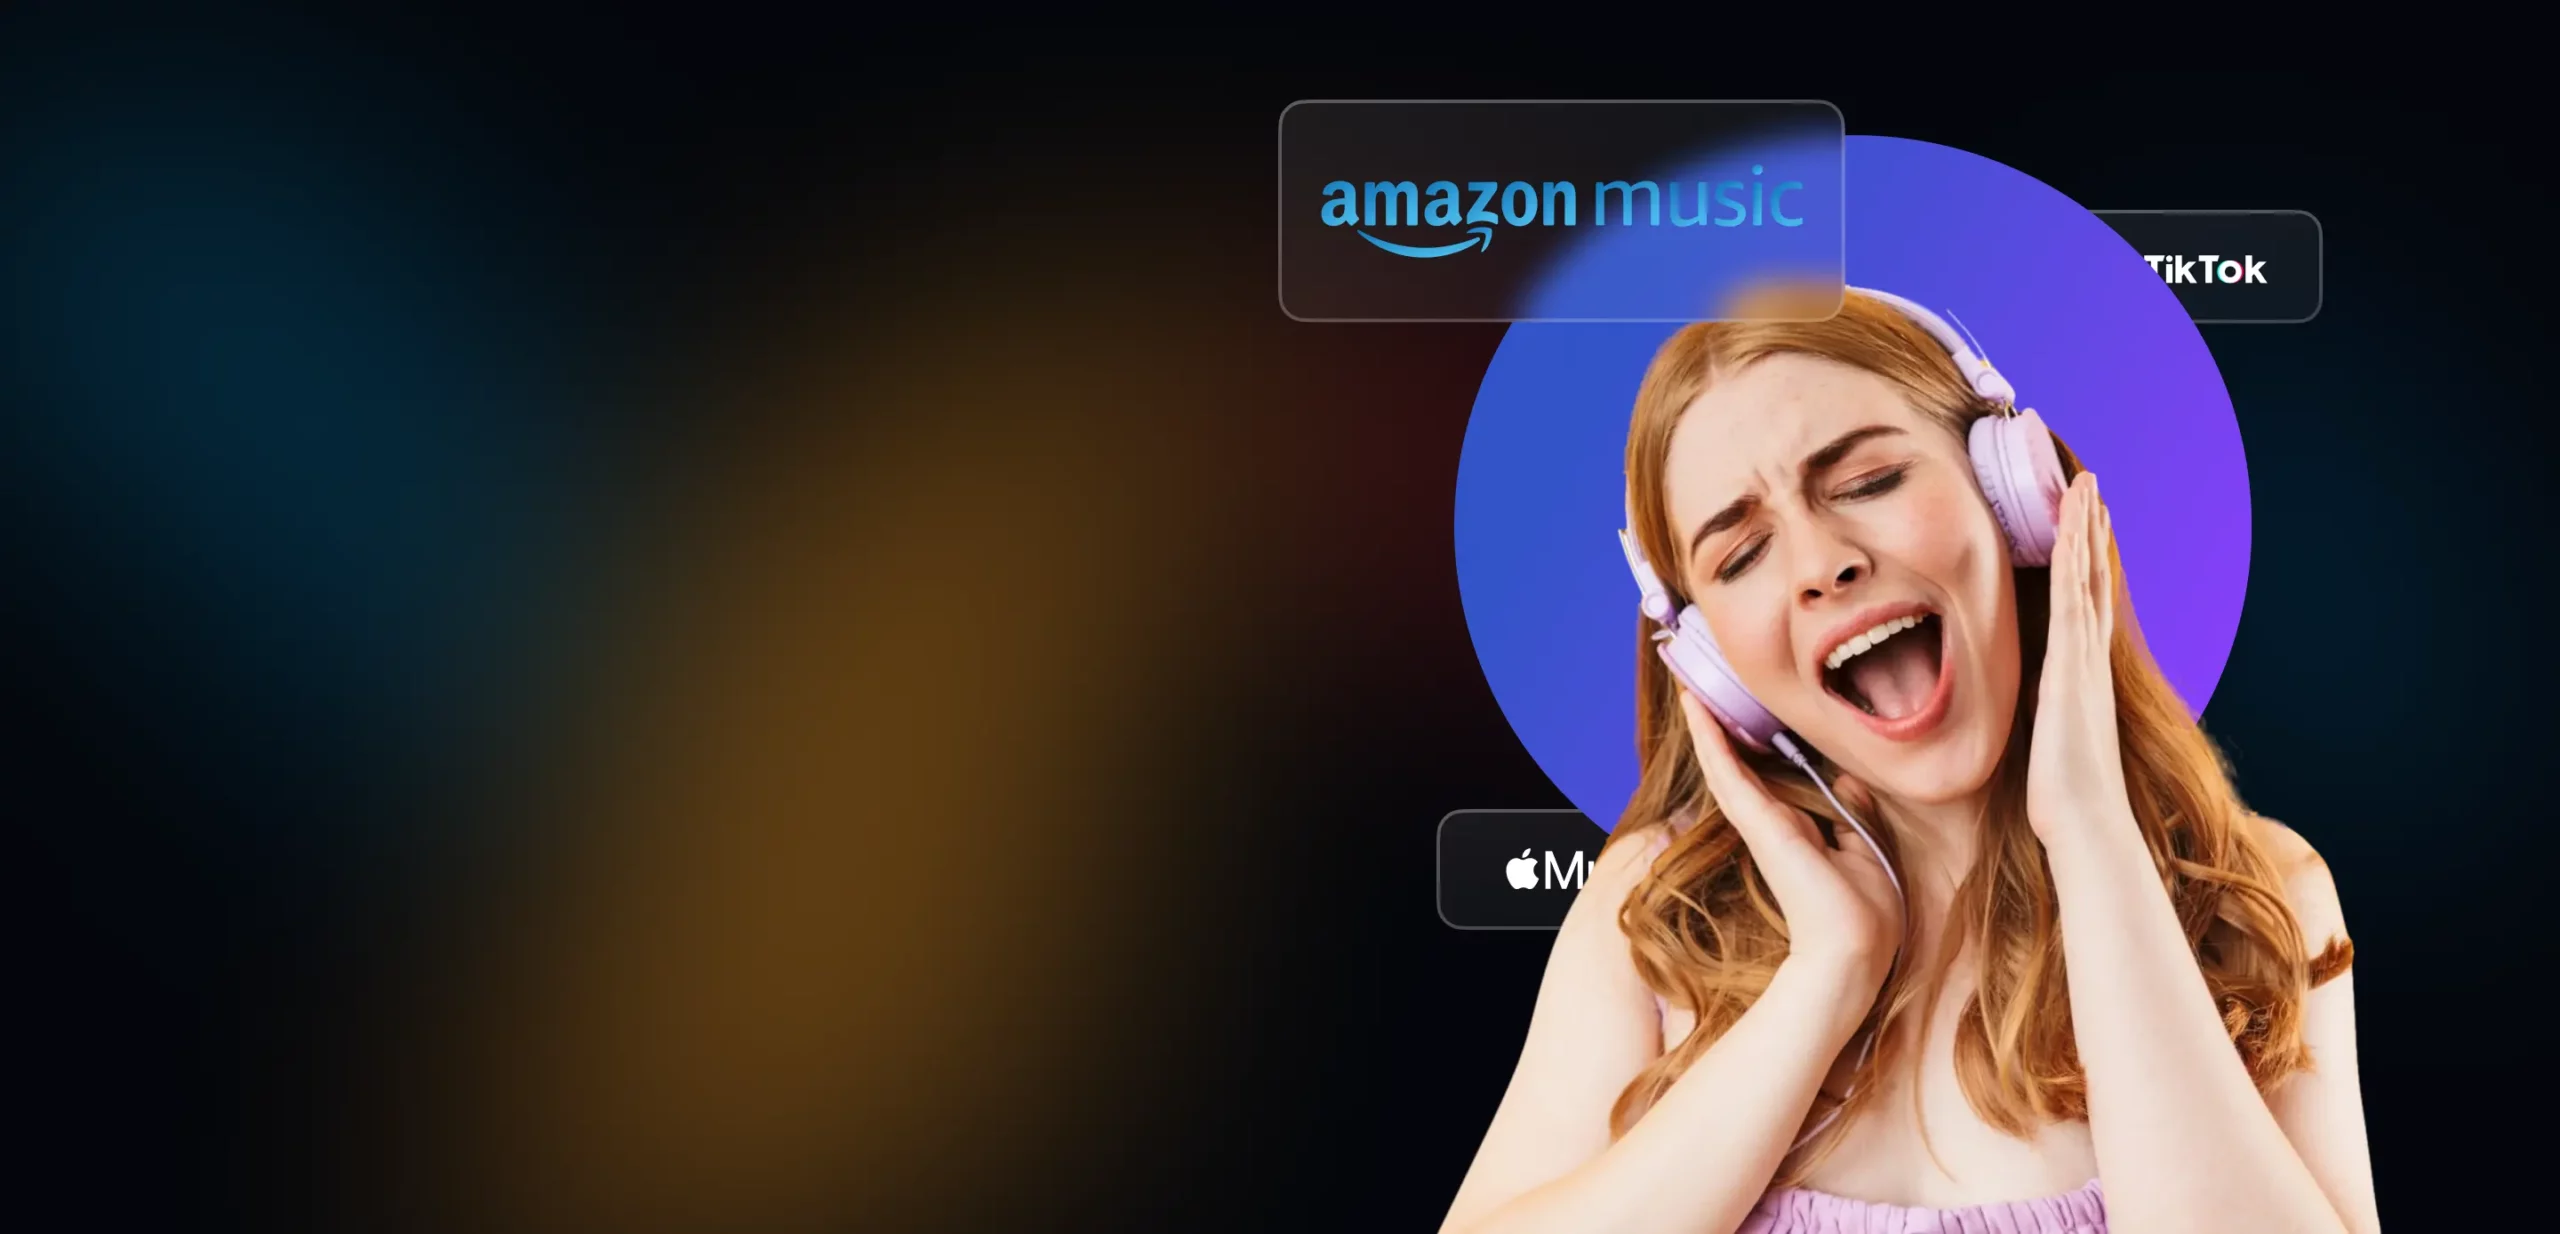 HOW TO UPLOAD YOUR MUSIC ON AMAZON MUSIC